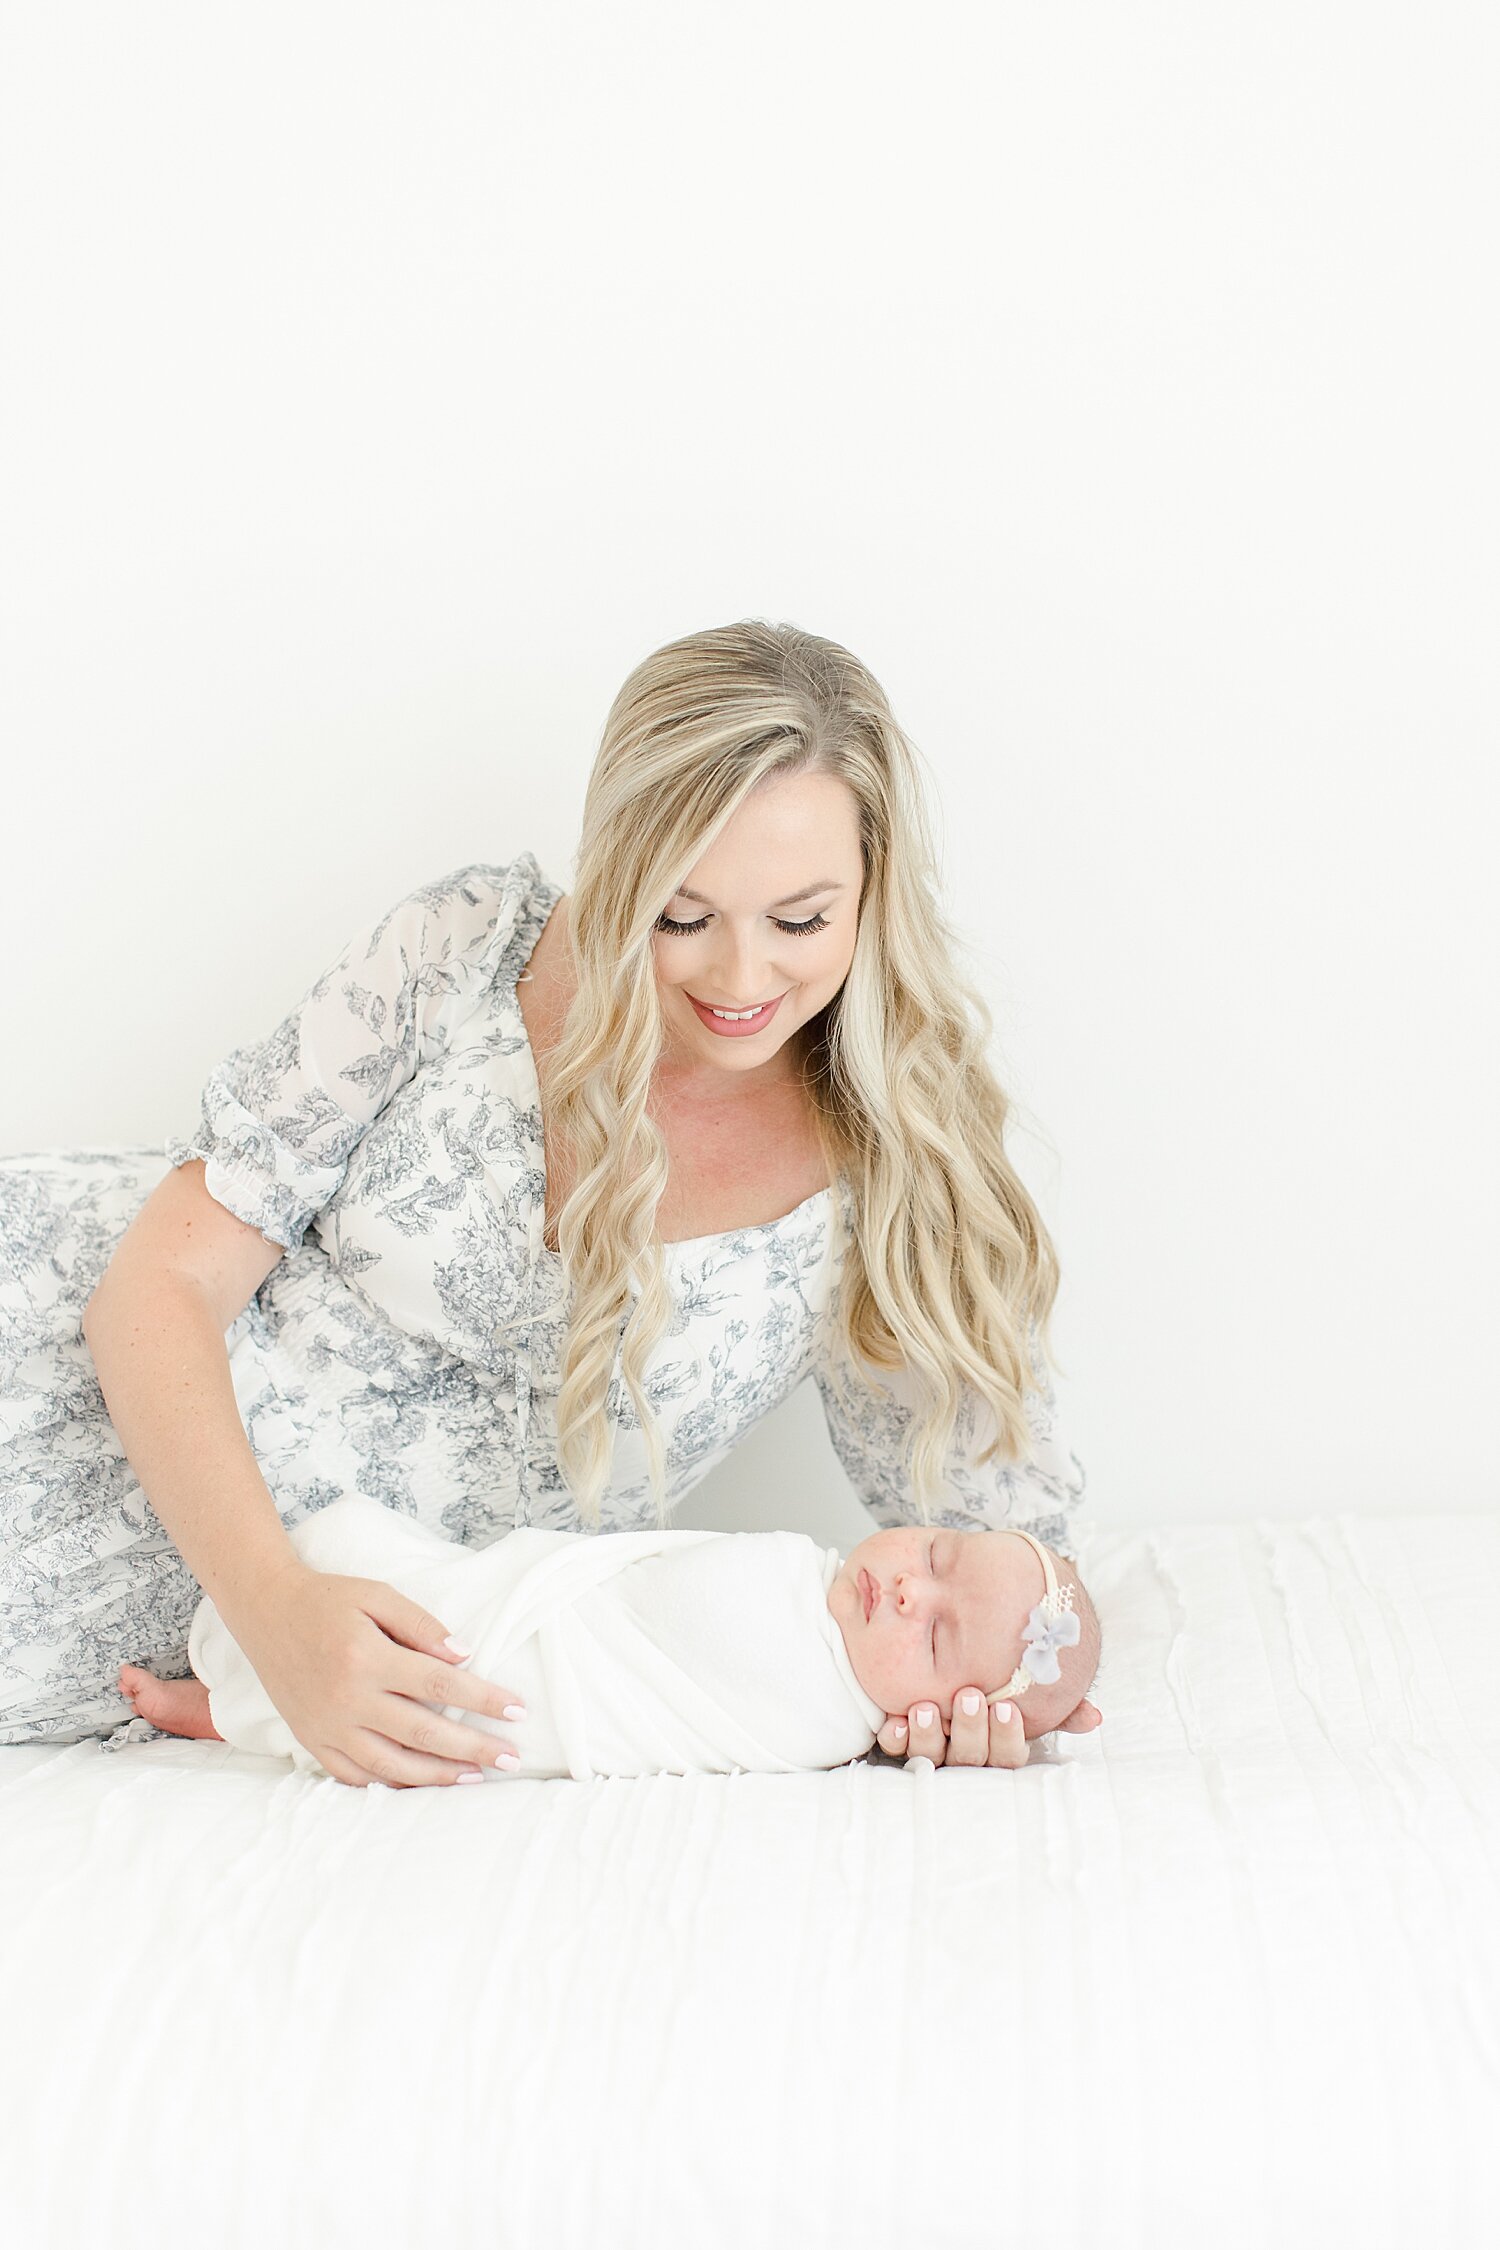 Mom and her newborn daughter | Kristin Wood Photography